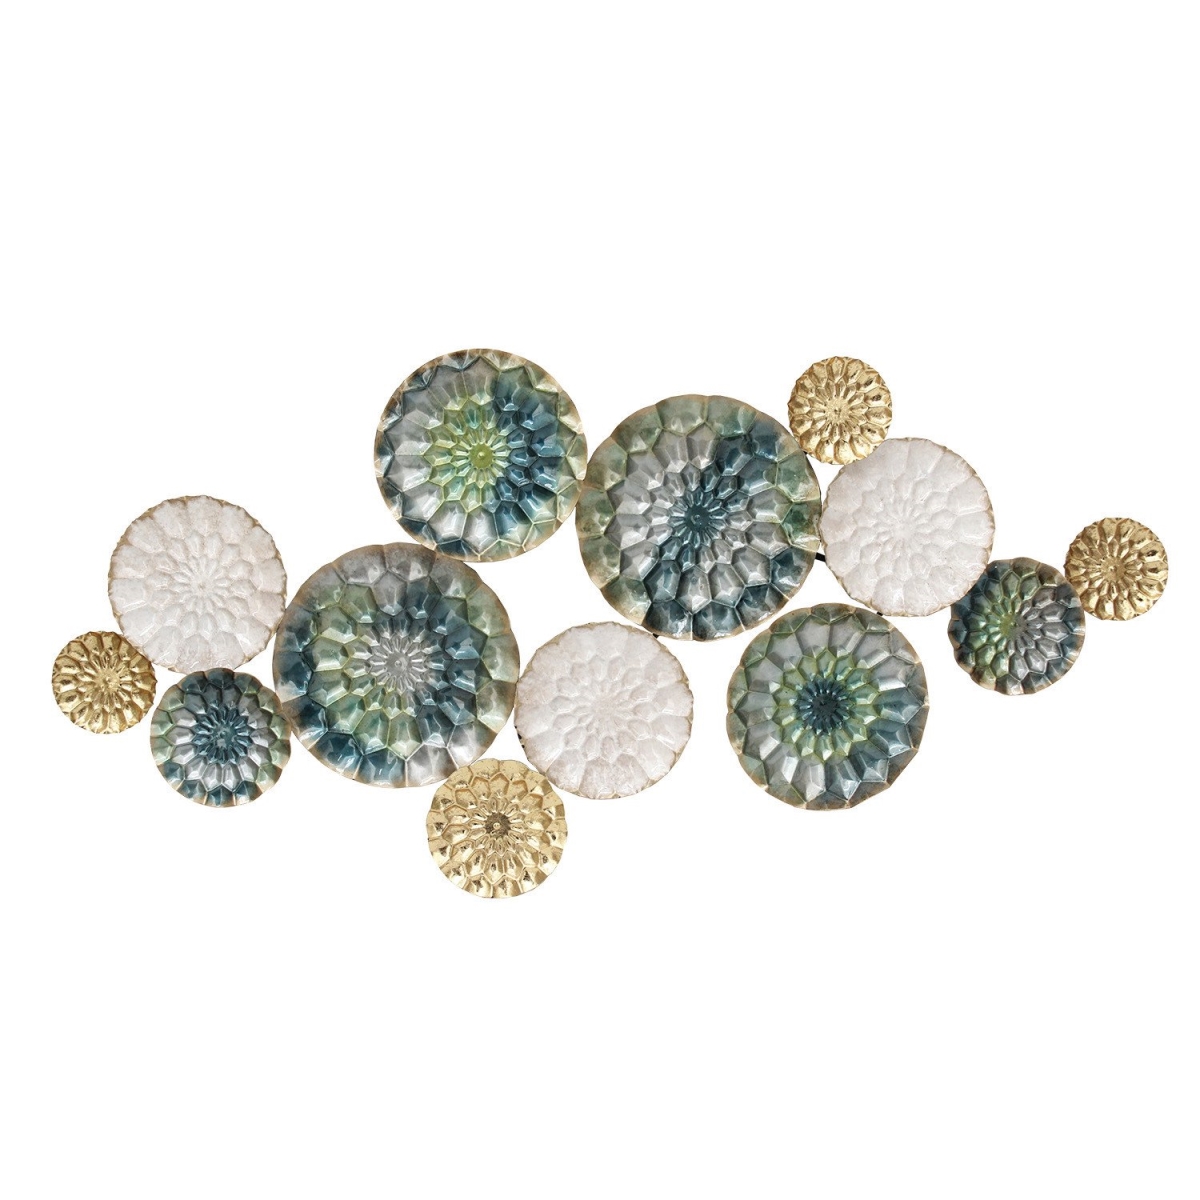 Home Roots 321107 Metal Wall Decor Textured Plates Of Mixed Green, Ivory & Touches Of Gold